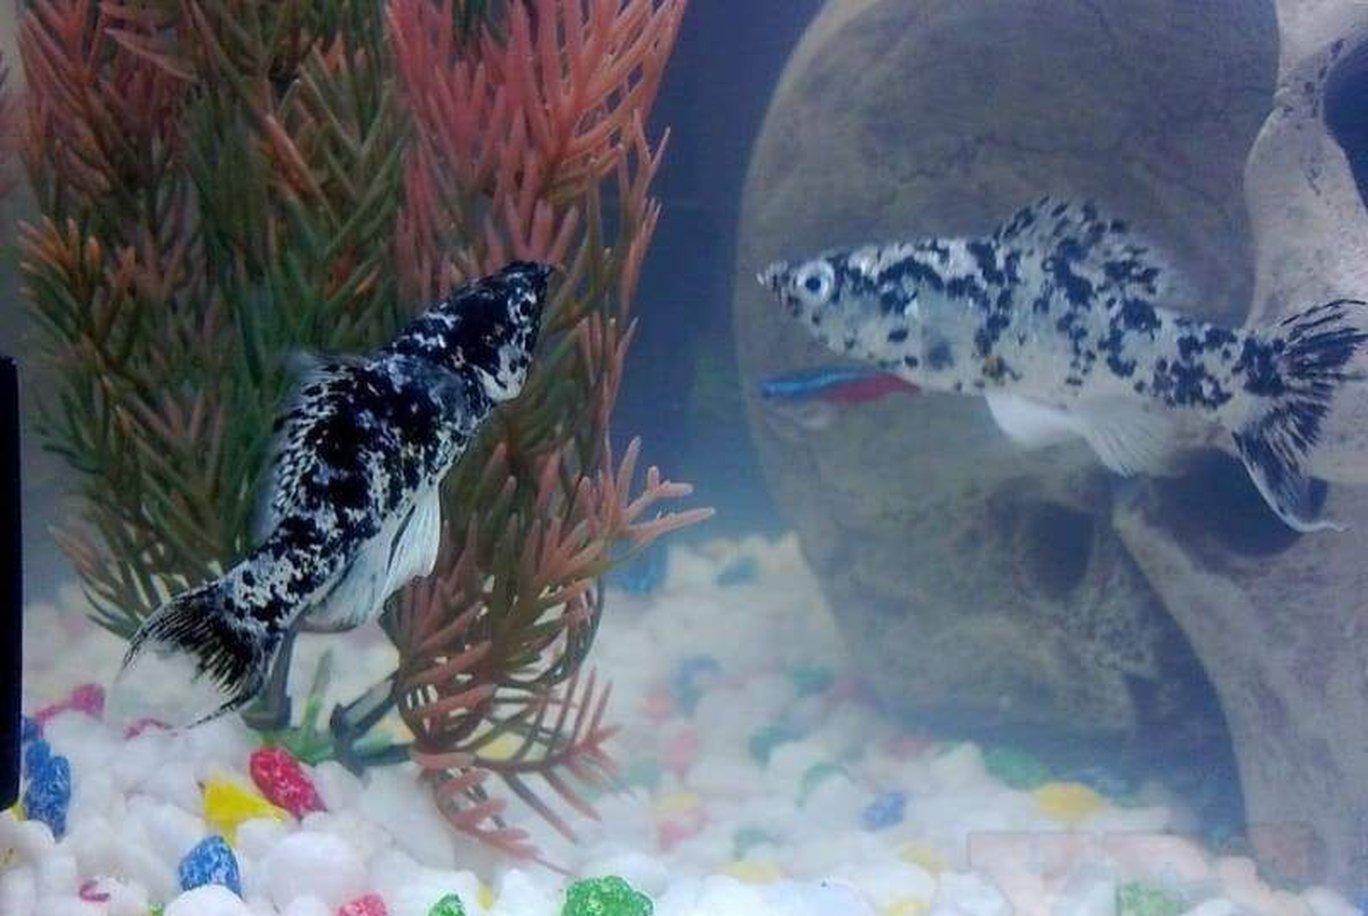 X10 Dalmatian Lyretail Molly Fish Sml/Med 1" - 2" - Freshwater Fish Free Shipping-Freshwater Fish Package-www.YourFishStore.com